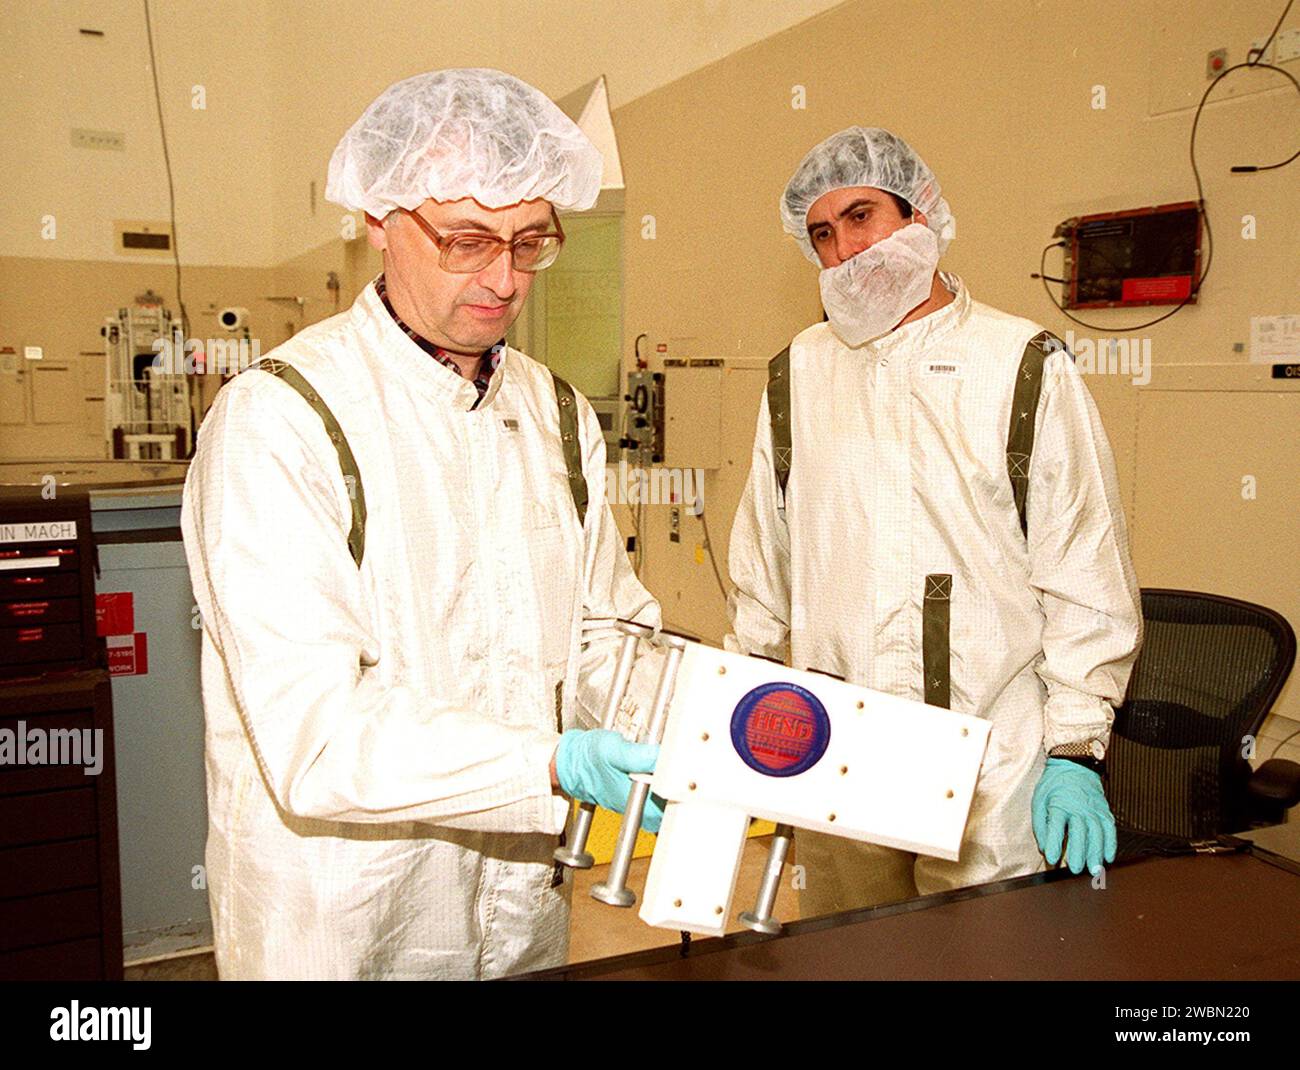 Two Russian scientists look over the High Energy Neutron Detector (HEND), part of the Gamma Ray Spectrometer (GRS), after its removal from the 2001 Mars Odyssey Orbiter. The HEND was built by Russia’s Space Research Institute (IKI). The GRS will achieve global mapping of the elemental composition of the surface and determine the abundance of hydrogen in the shallow subsurface. The orbiter will carry two other science instruments THEMIS and the Mars Radiation Environment Experiment (MARIE). THEMIS will map the mineralogy and morphology of the Martian surface using a high-resolution camera and a Stock Photo